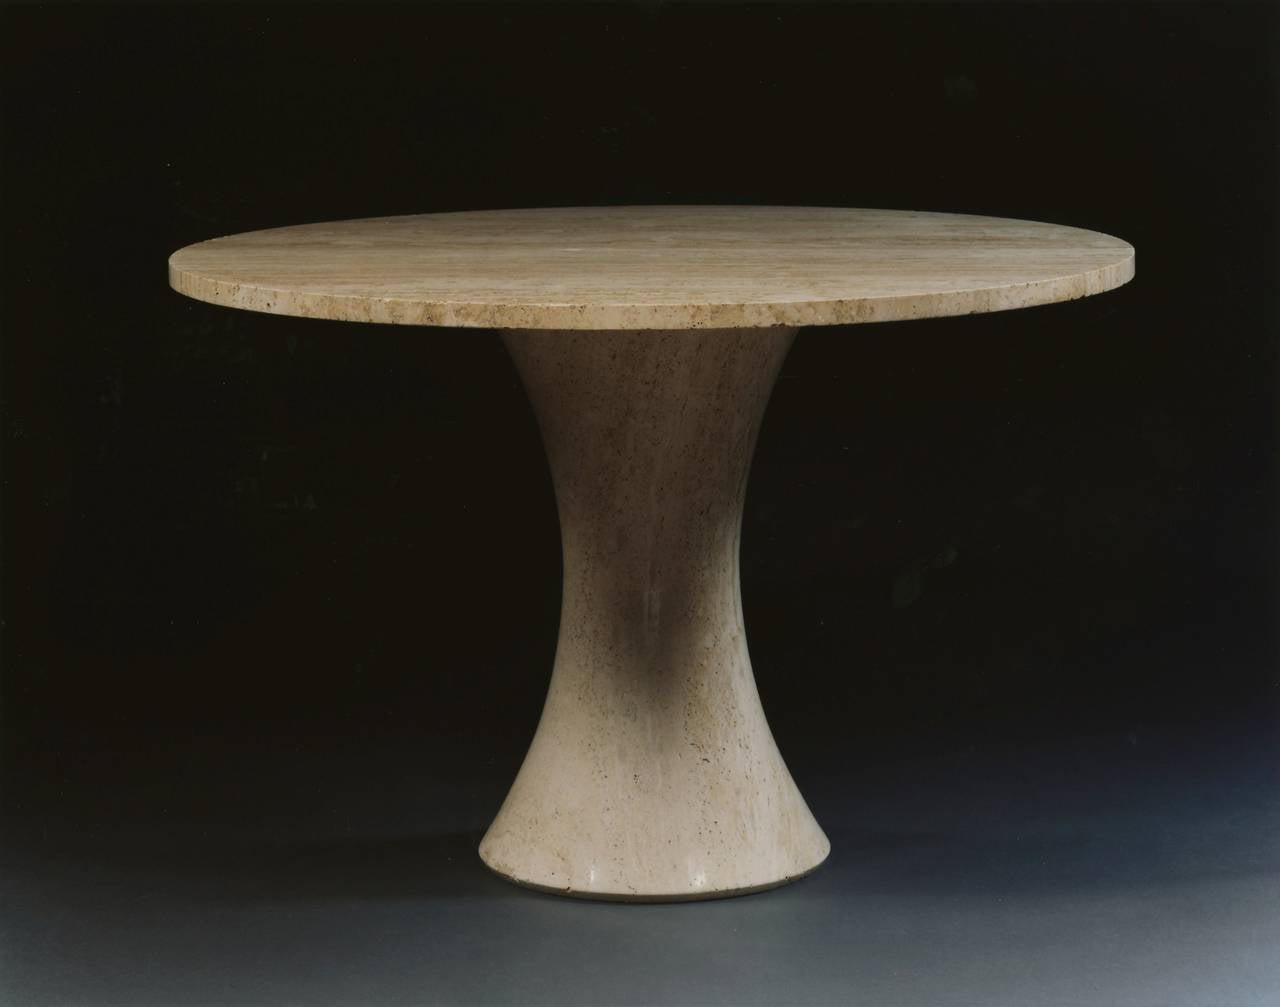 A travertine circular dining table designed by Henry Moore and made under his direction at the Henraux Marble Works, Querceta.

The circular top raised on a waisted stem with faceted edges. Detailed research report available on request.